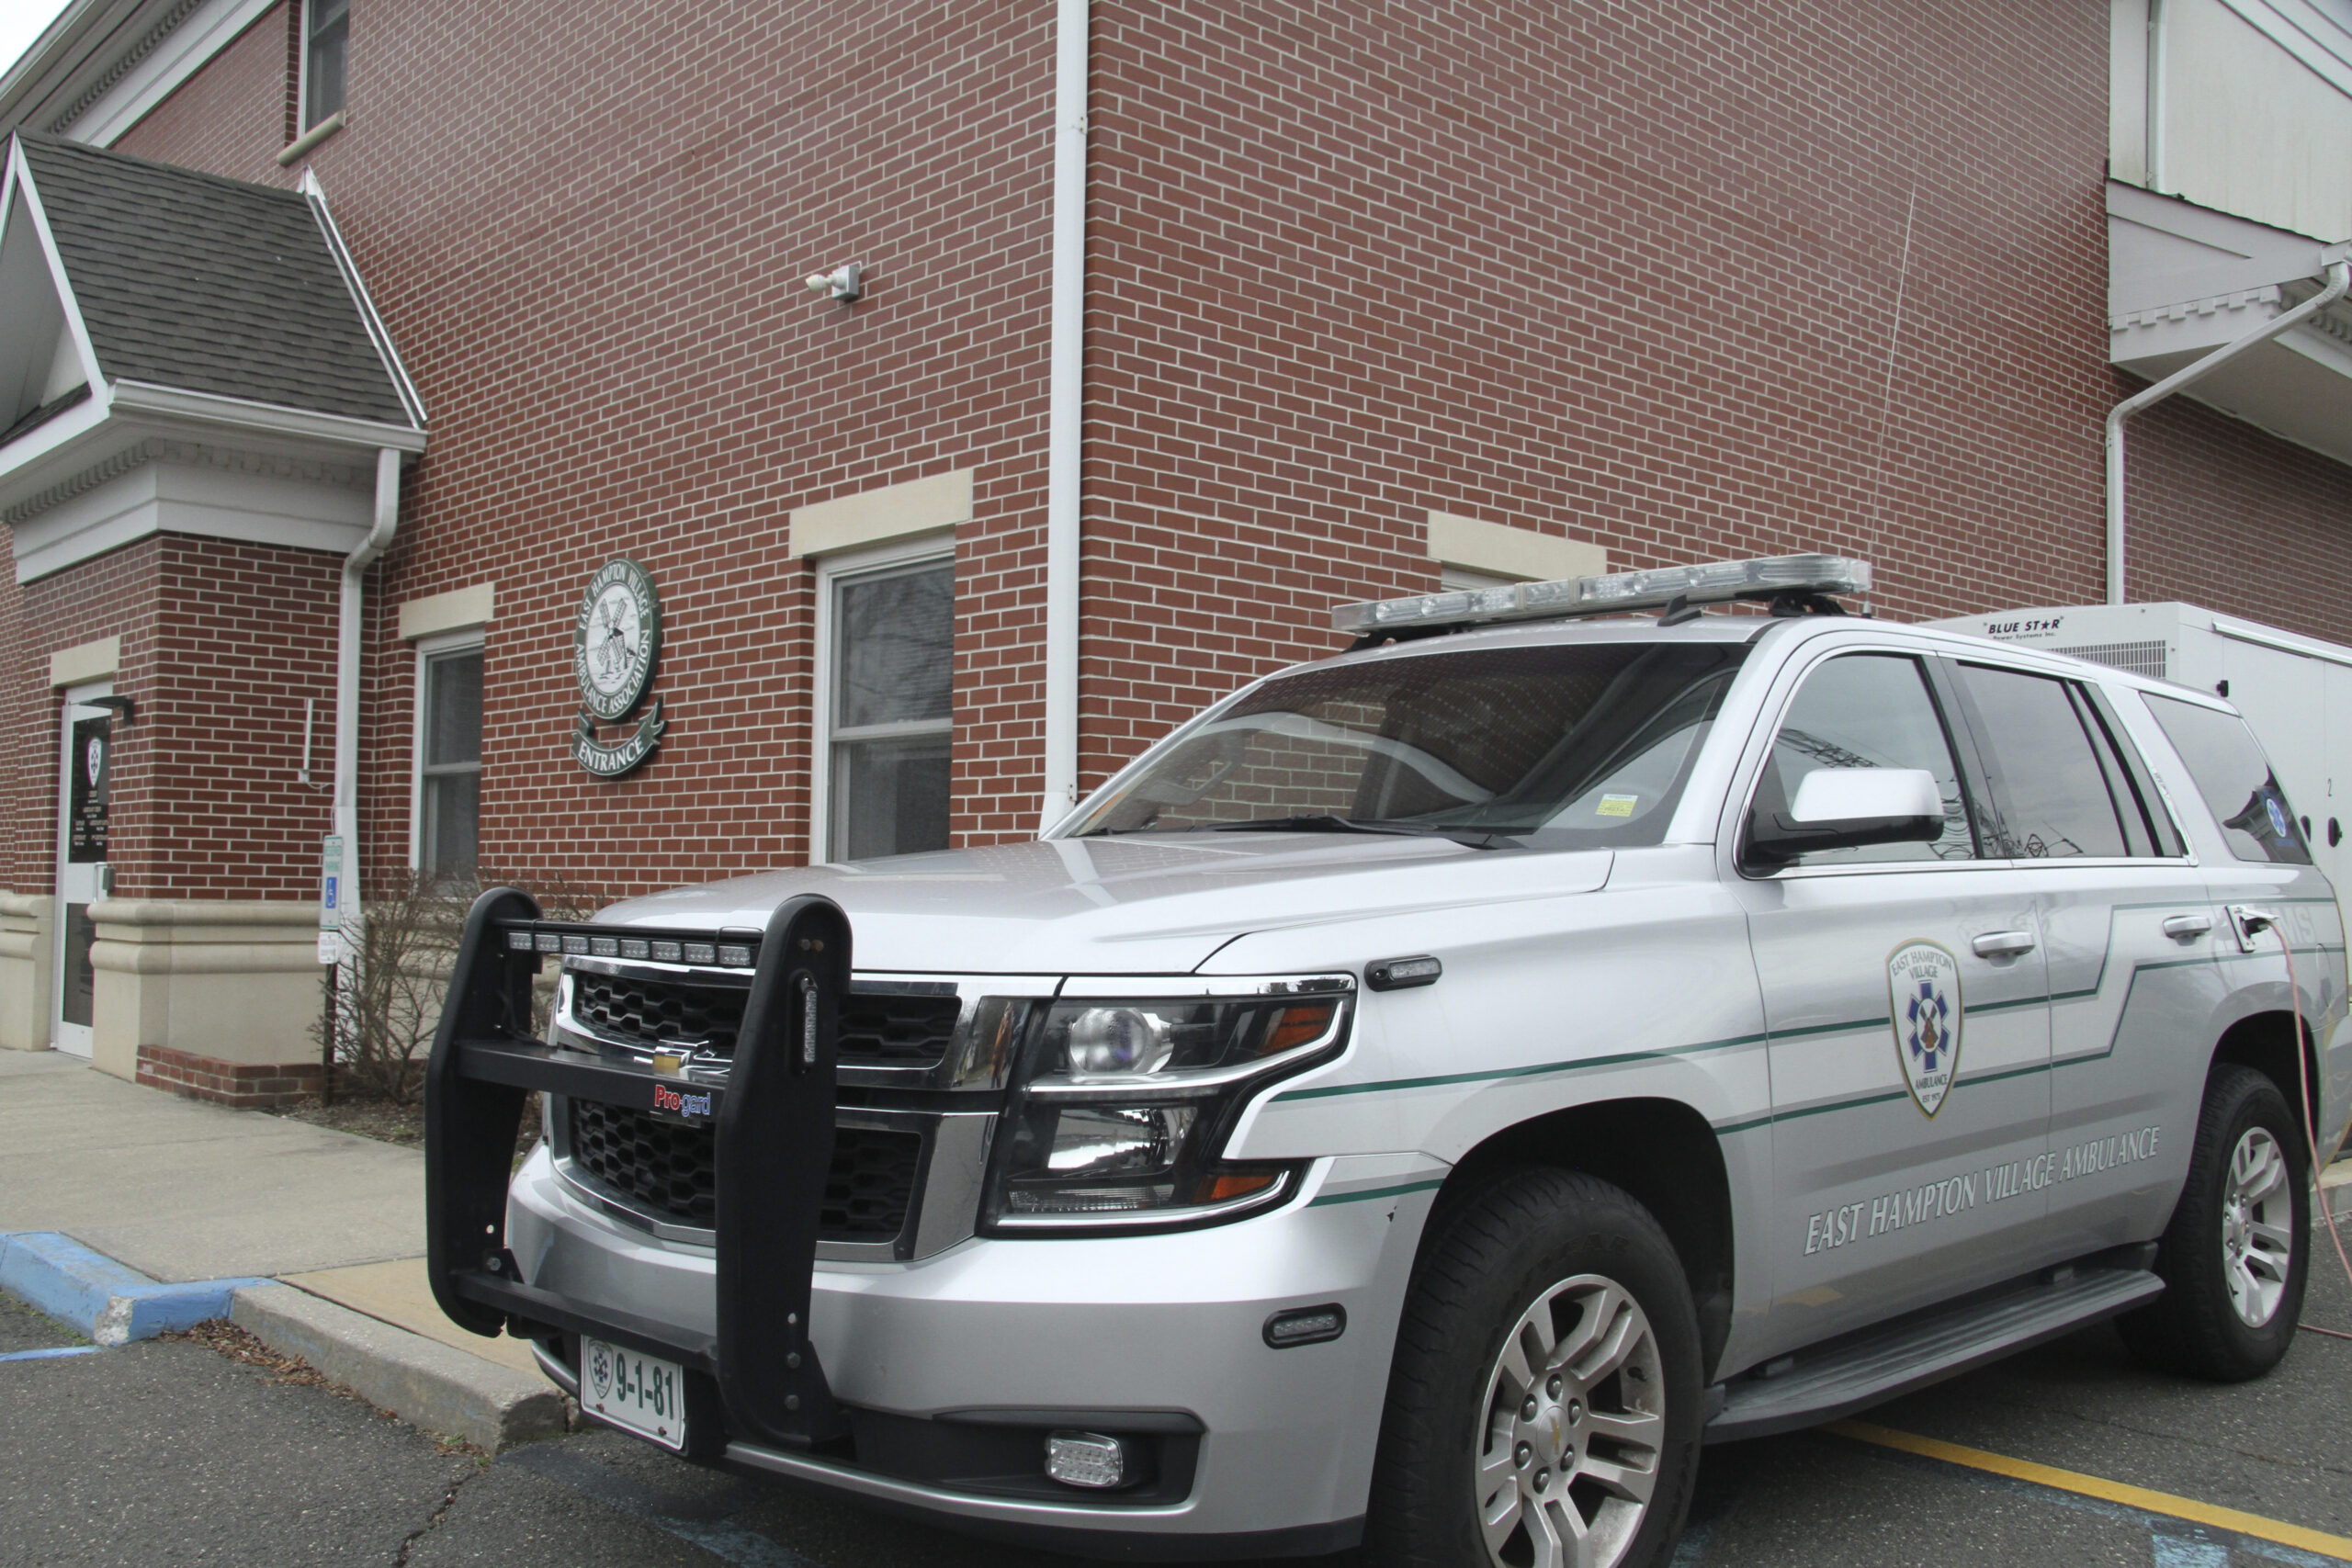 East Hampton Village is poised to create a new Emergency Medical Services department to run the village’s ambulance services.